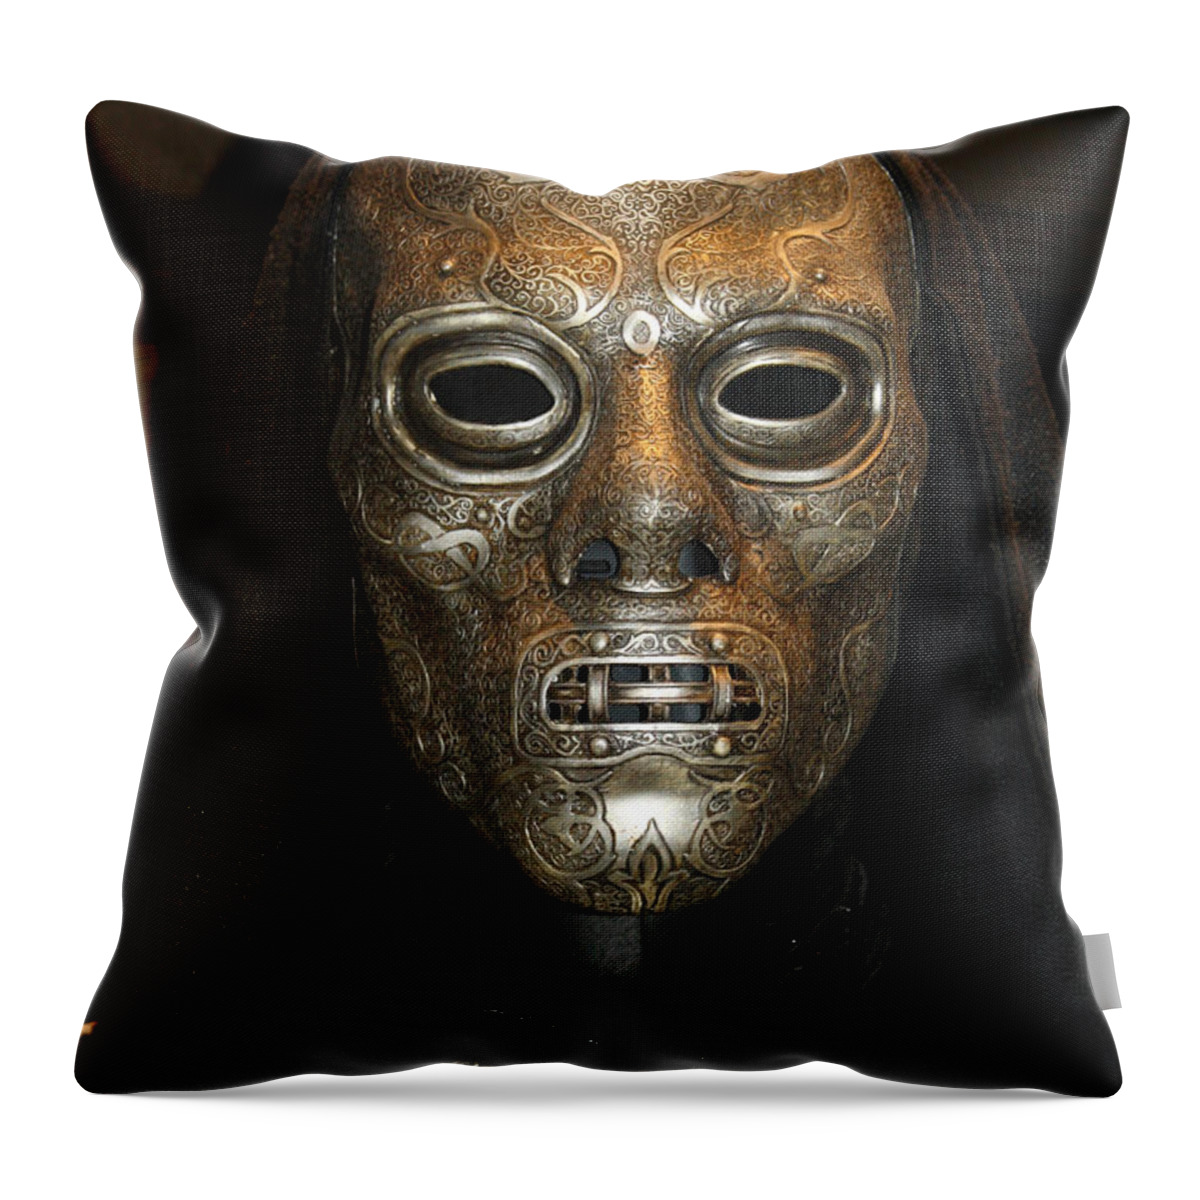 Harry Potter Throw Pillow featuring the photograph Death Eater by David Nicholls